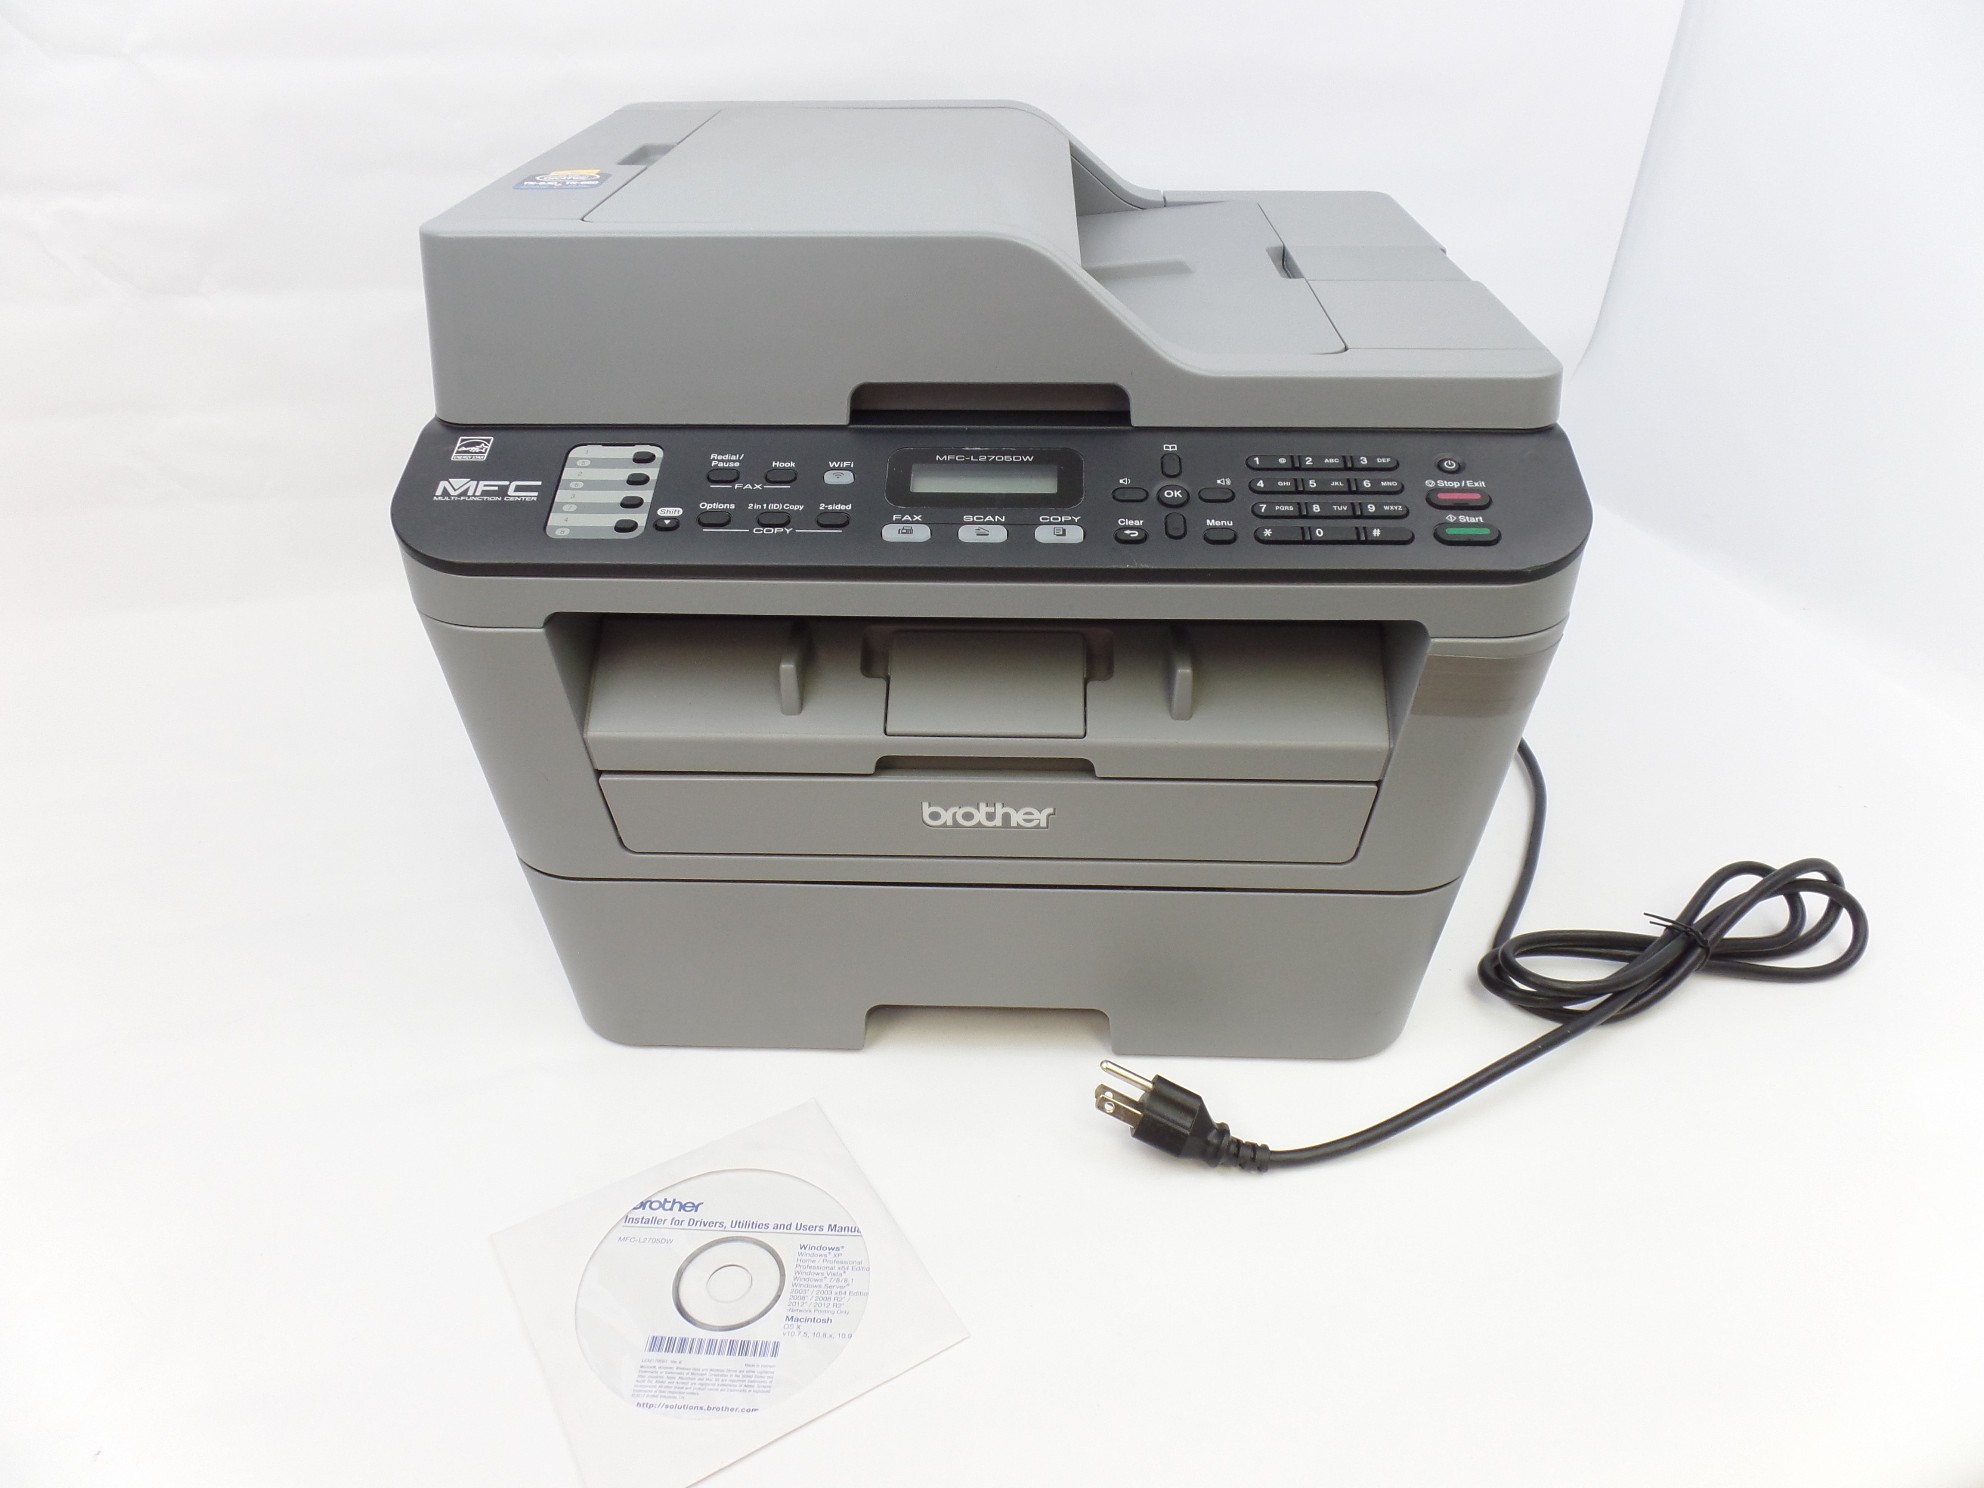 READ: scanner doesn't work, Brother MFC-L2705DW Laser Printer Wireless